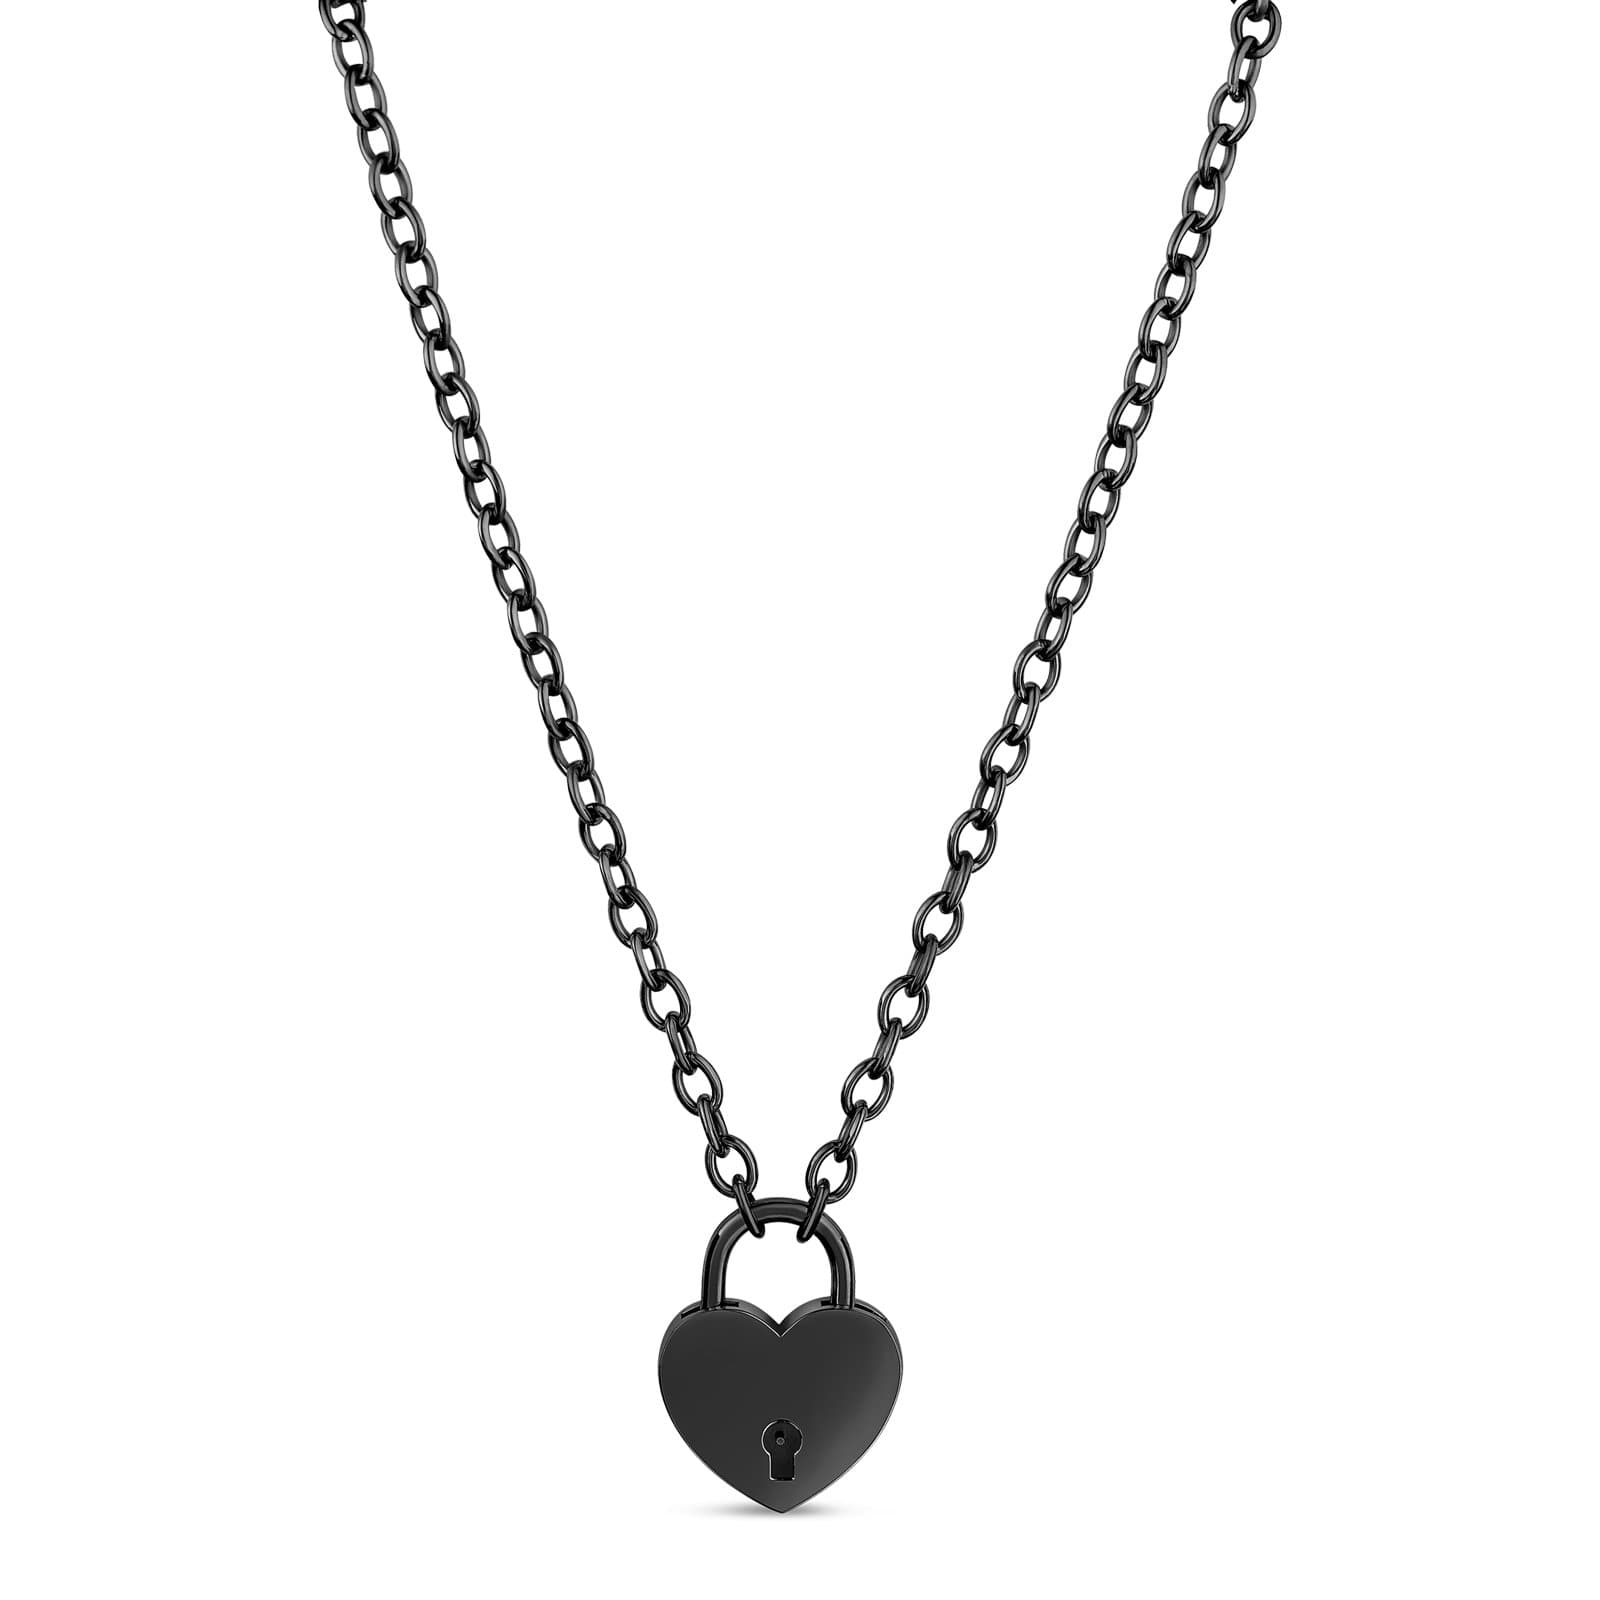 Chain Necklace with Heart Lock – Eternity